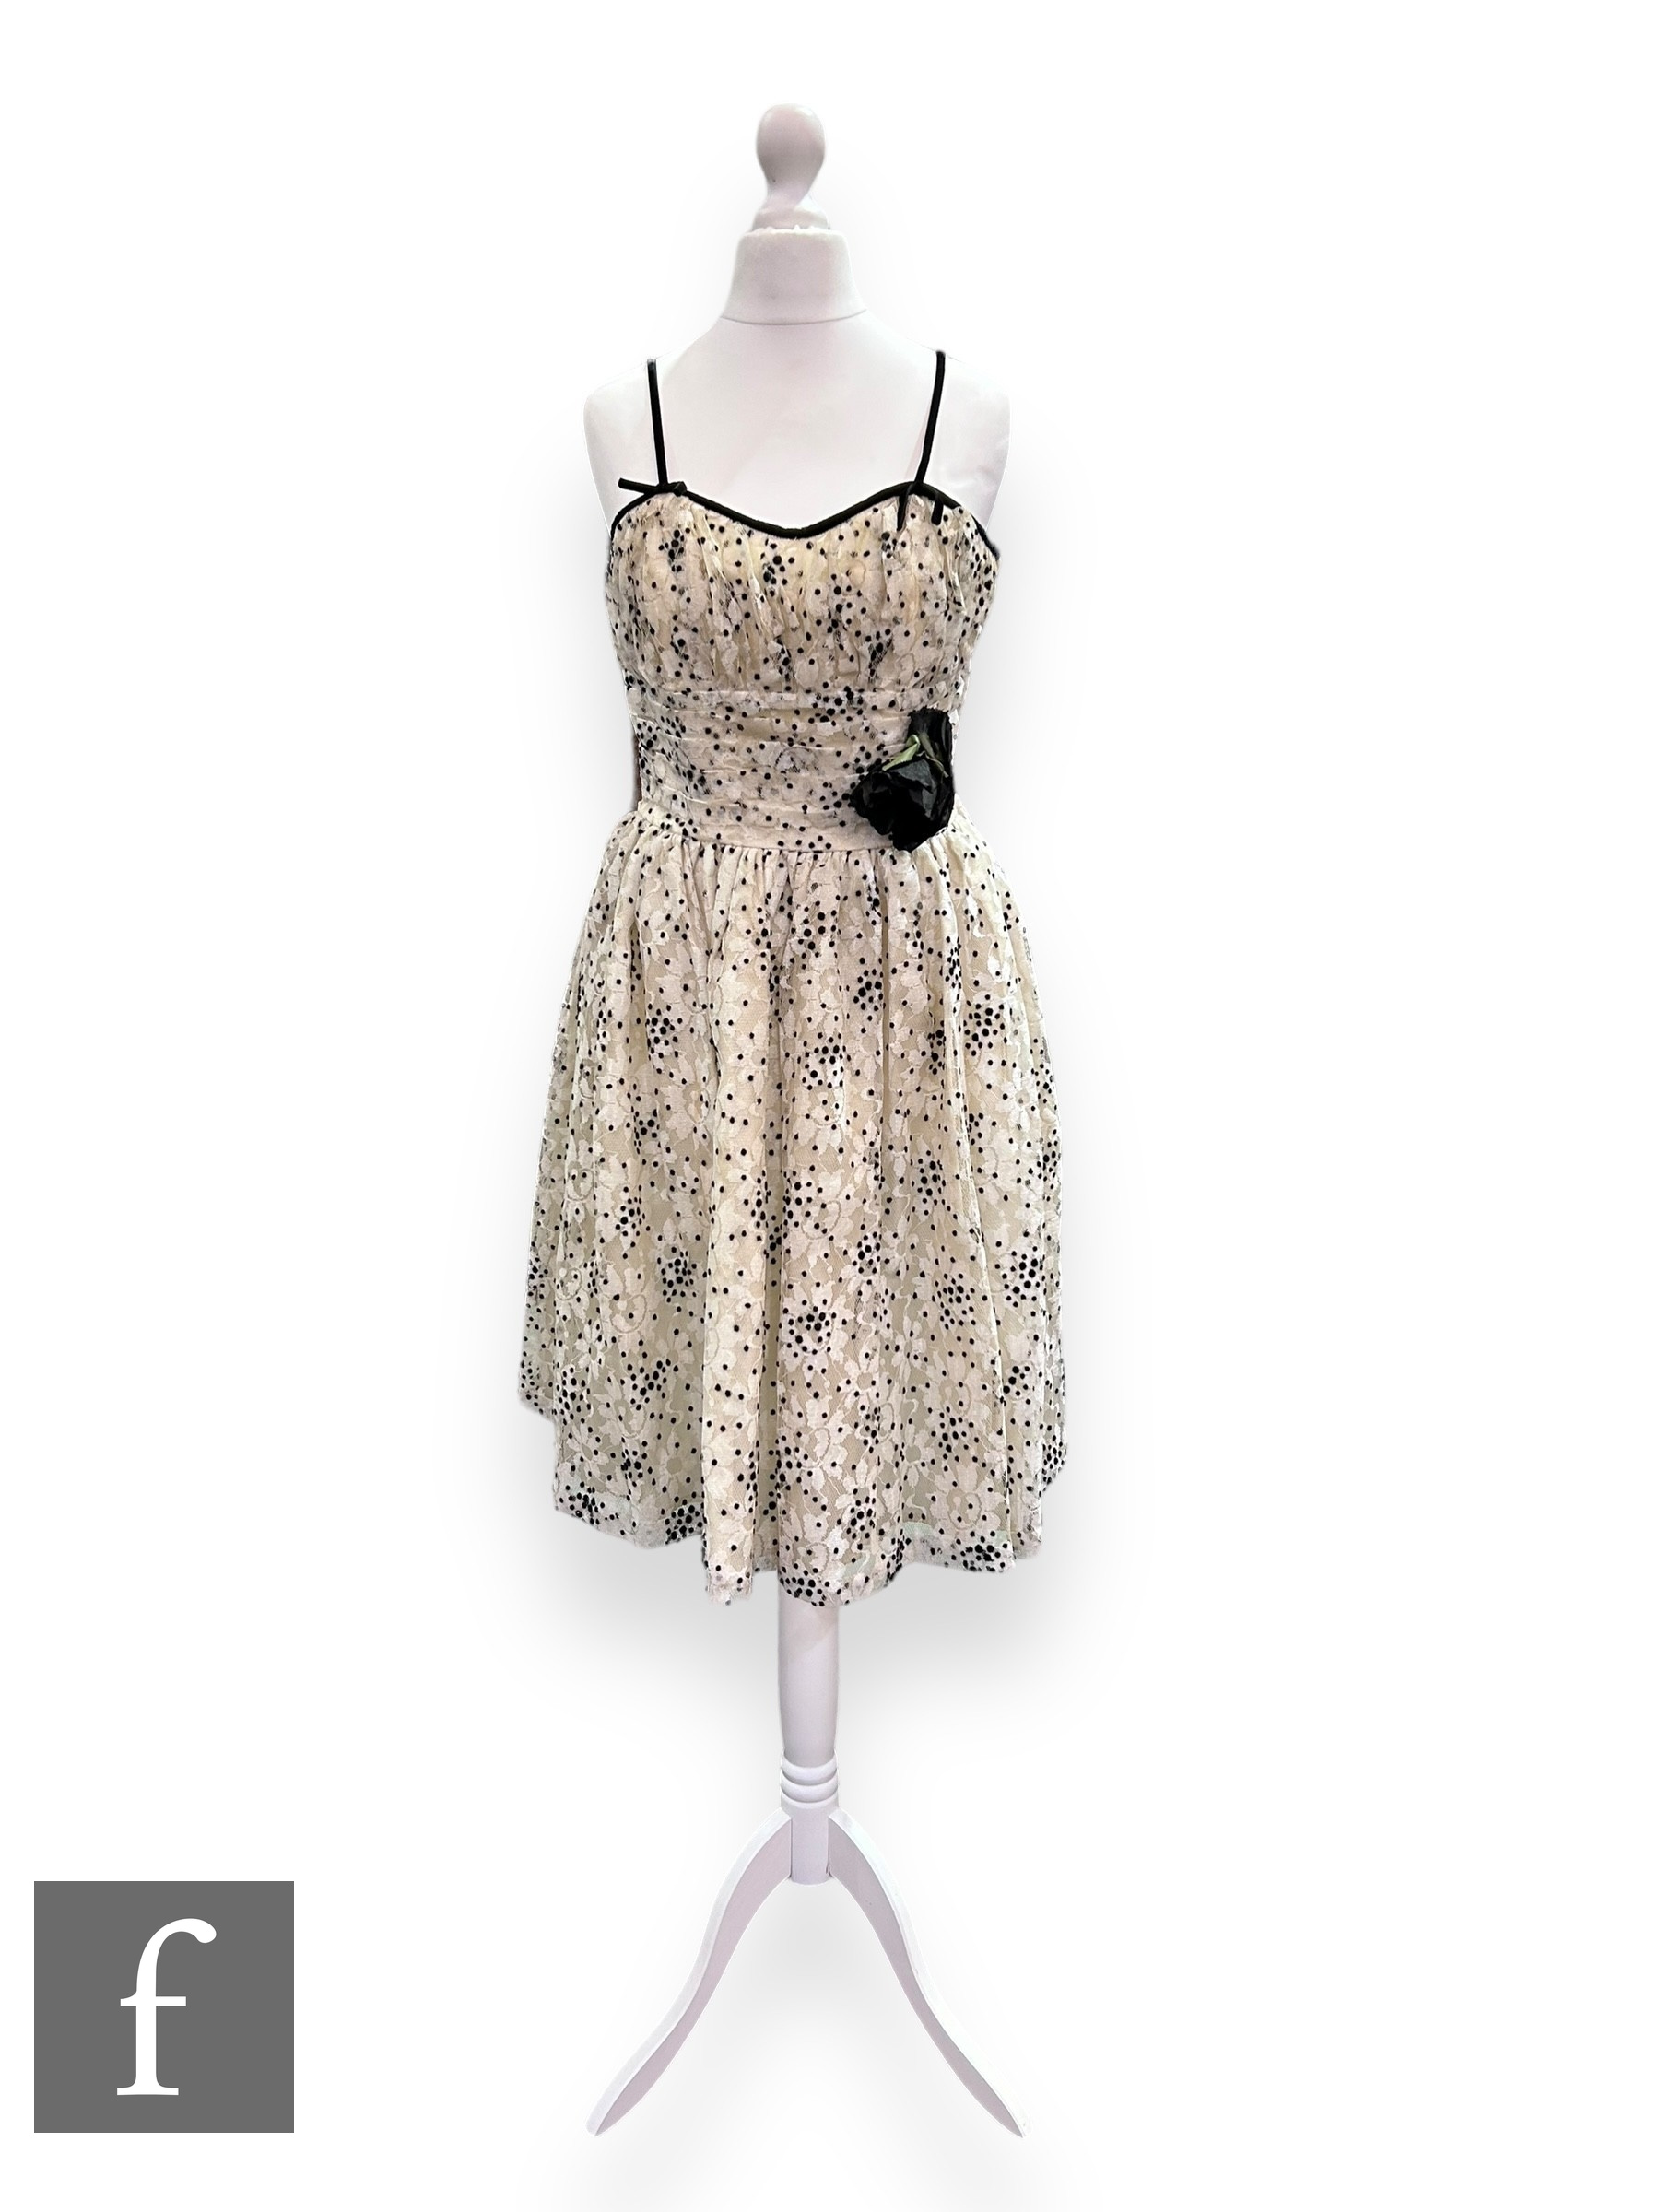 A 1950s/60s vintage evening dress, the ruched and pleated bodice with thin black straps before a